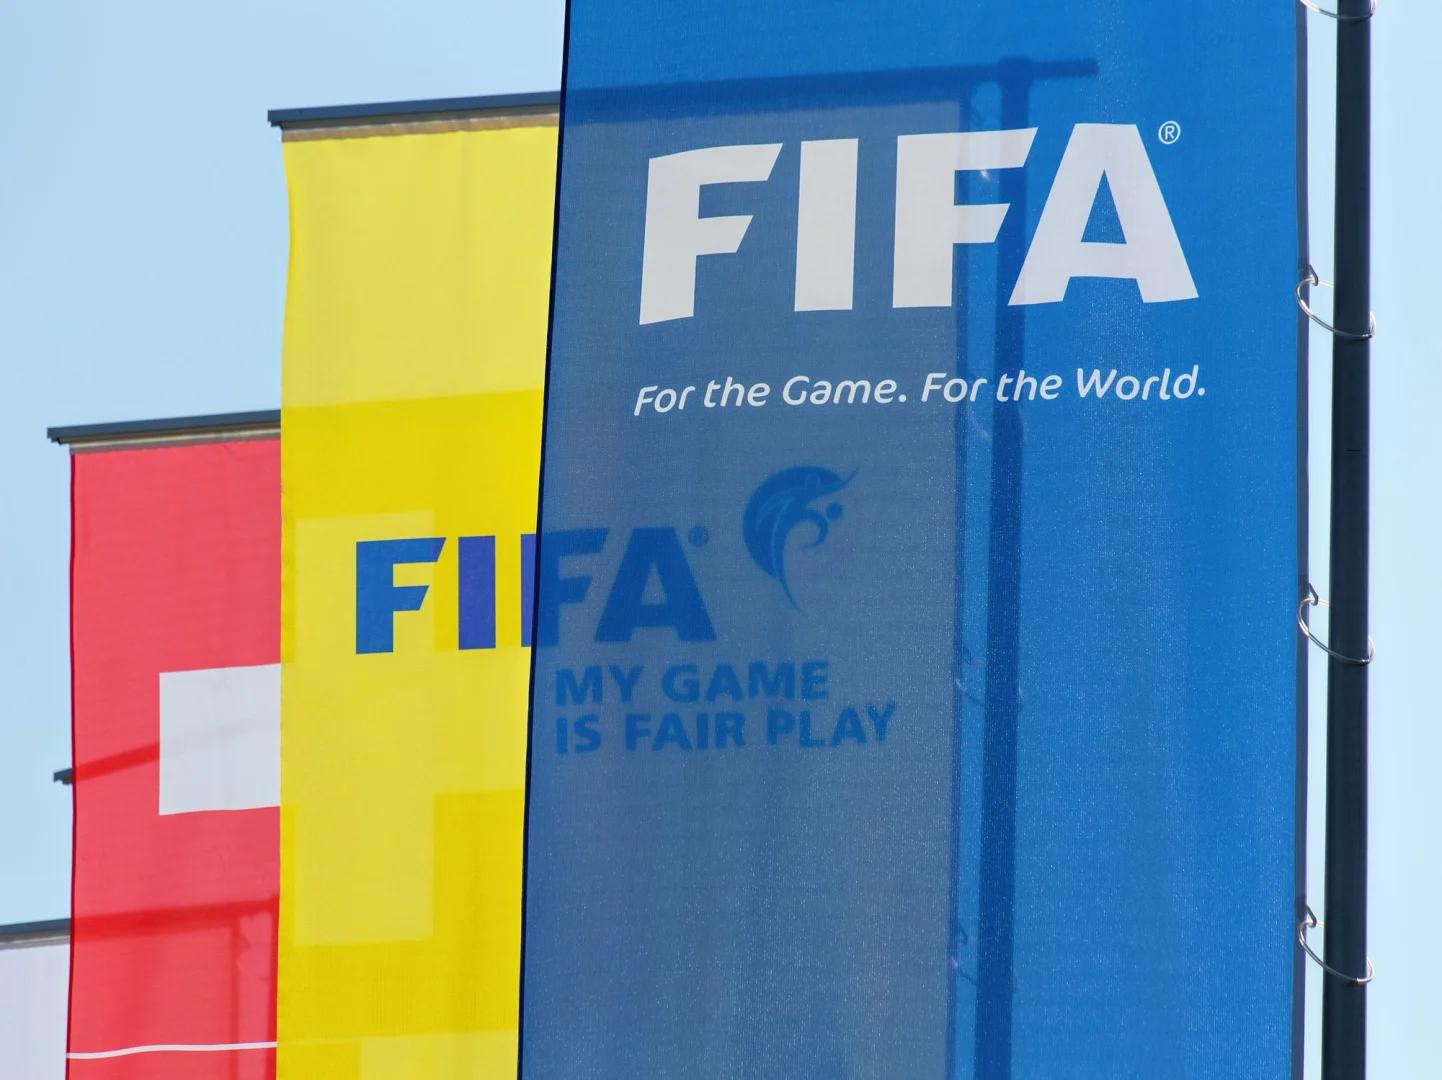 5-fold increase in sudden cardiac and unexplained deaths among FIFA athletes in 2021